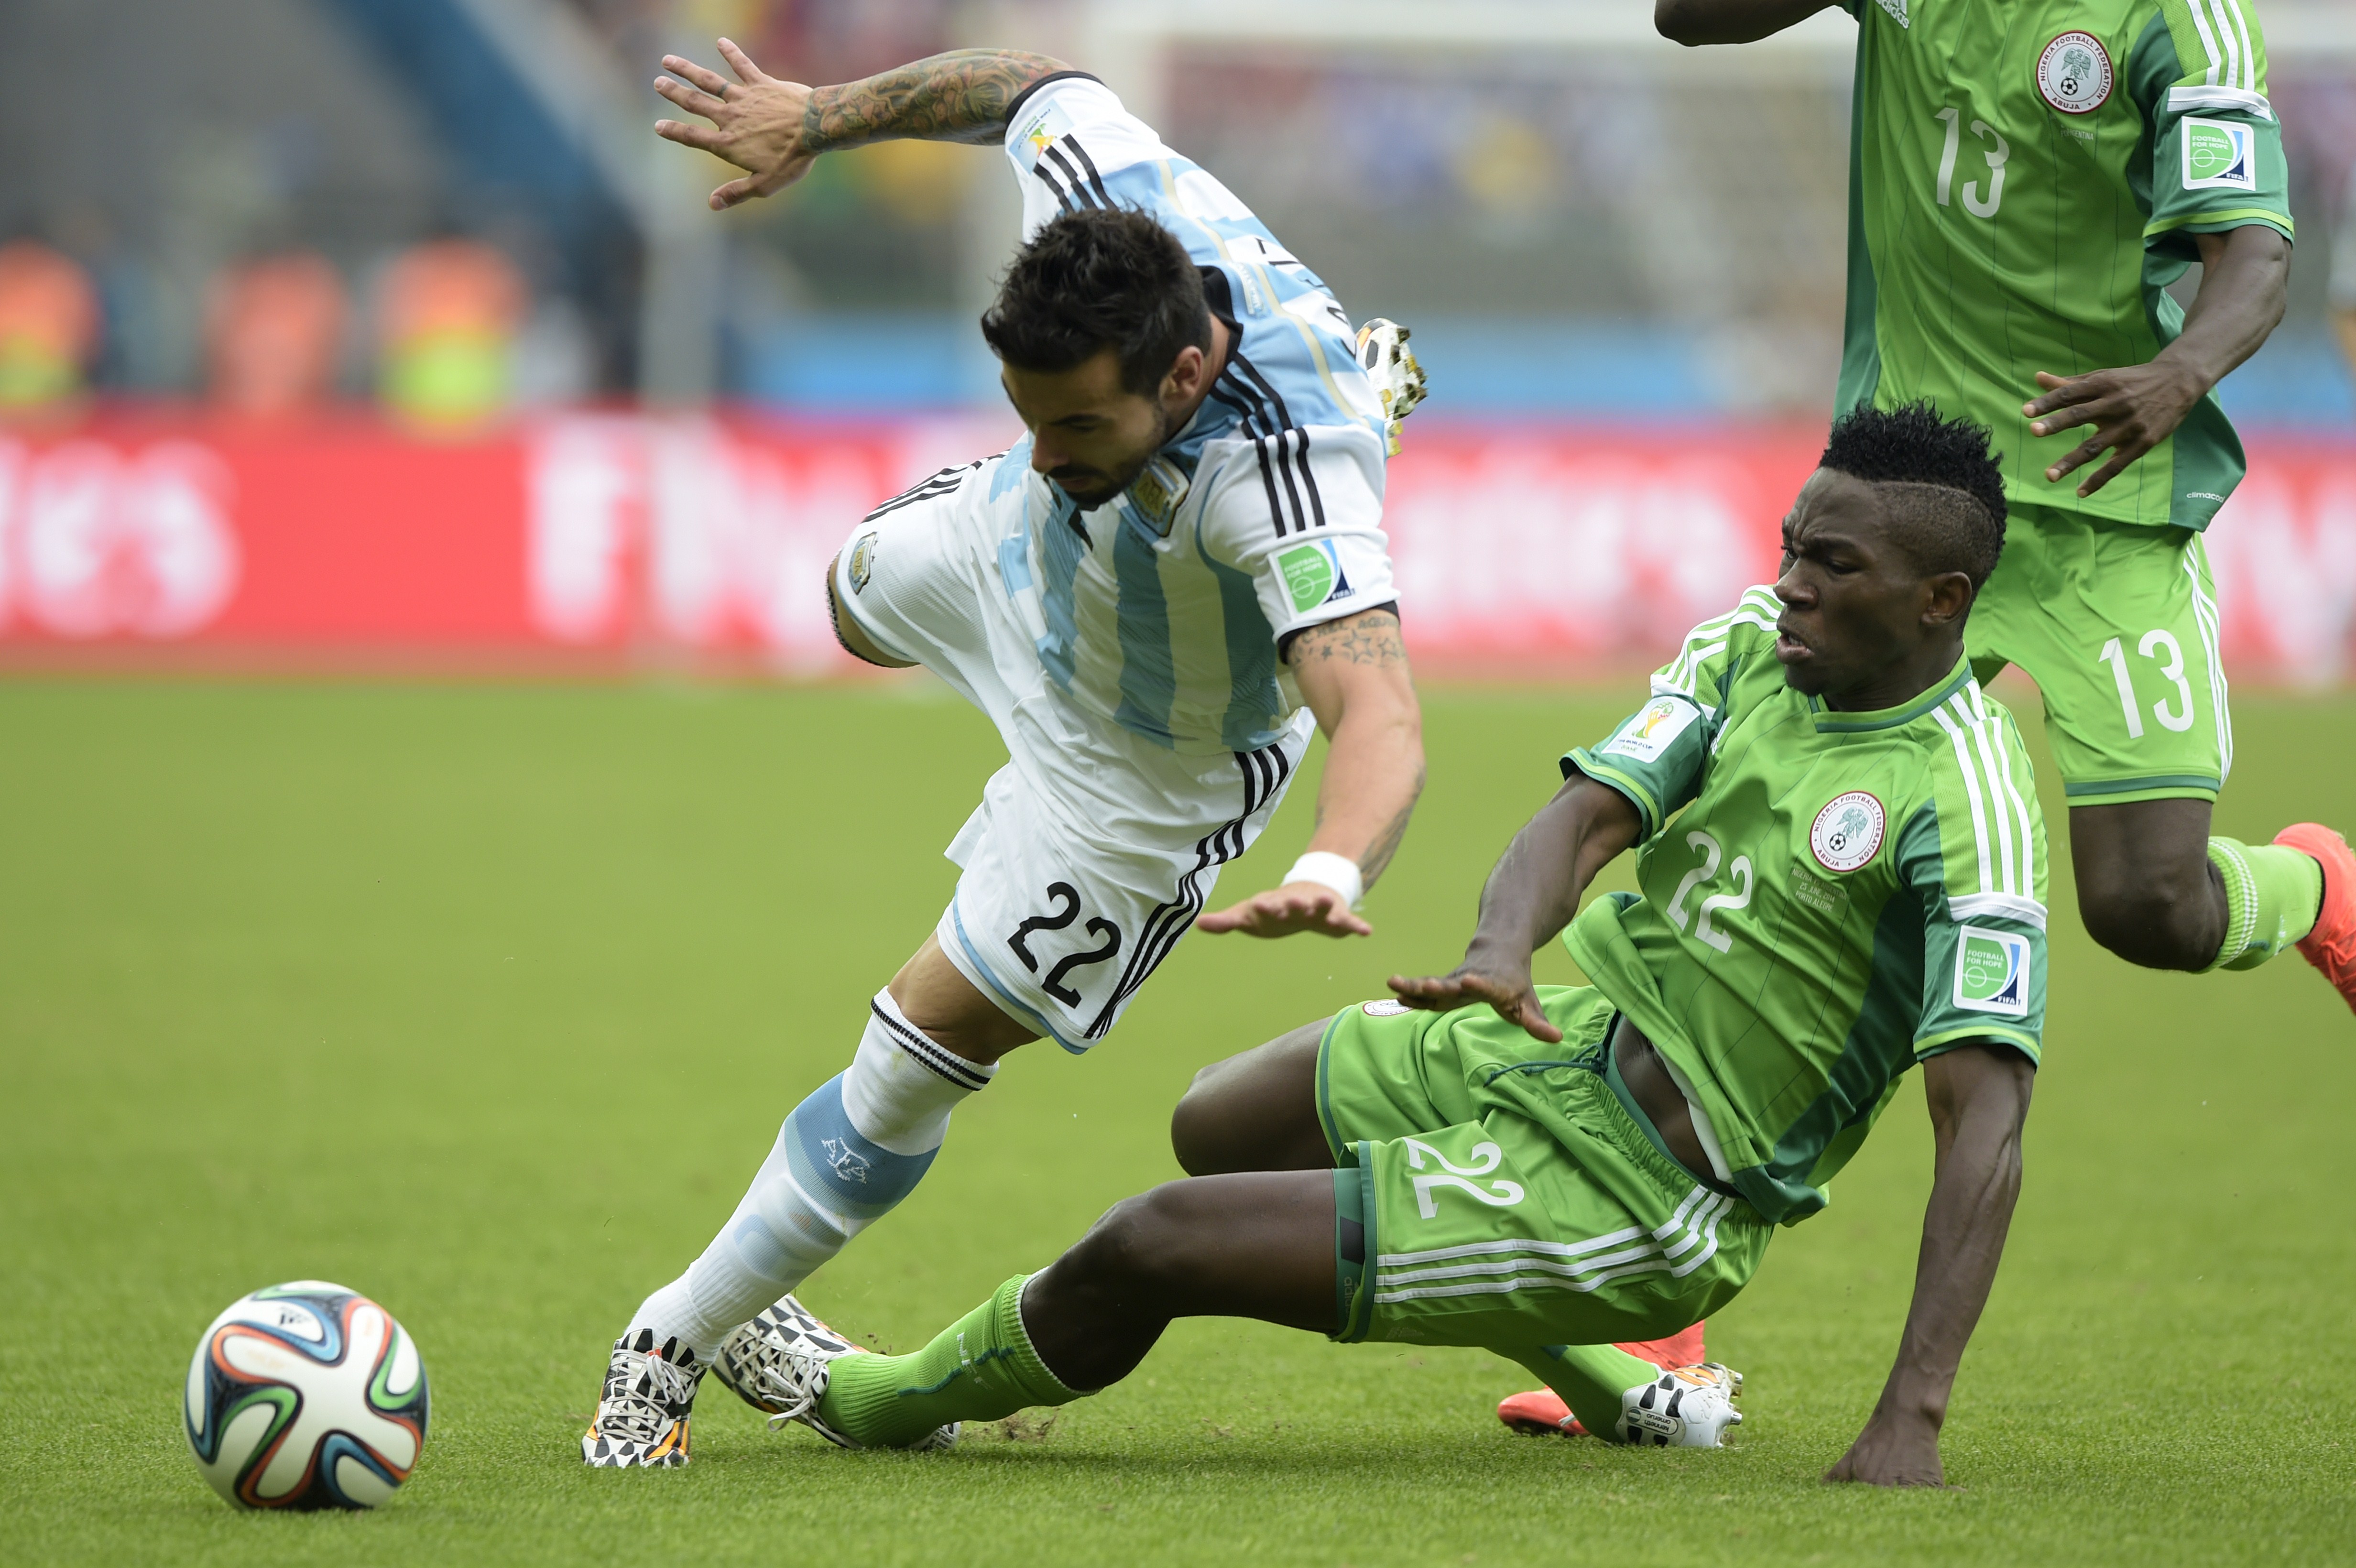 Argentina's forward Ezequiel Lavezzi (L) and Nigeria's defender Kenneth Omeruo, vie for the ball during a Group F football match between Nigeria and Argentina at the Beira-Rio Stadium in Porto Alegre during the 2014 FIFA World Cup on June 25, 2014.  AFP PHOTO / JUAN MABROMATA        (Photo credit should read JUAN MABROMATA/AFP/Getty Images)